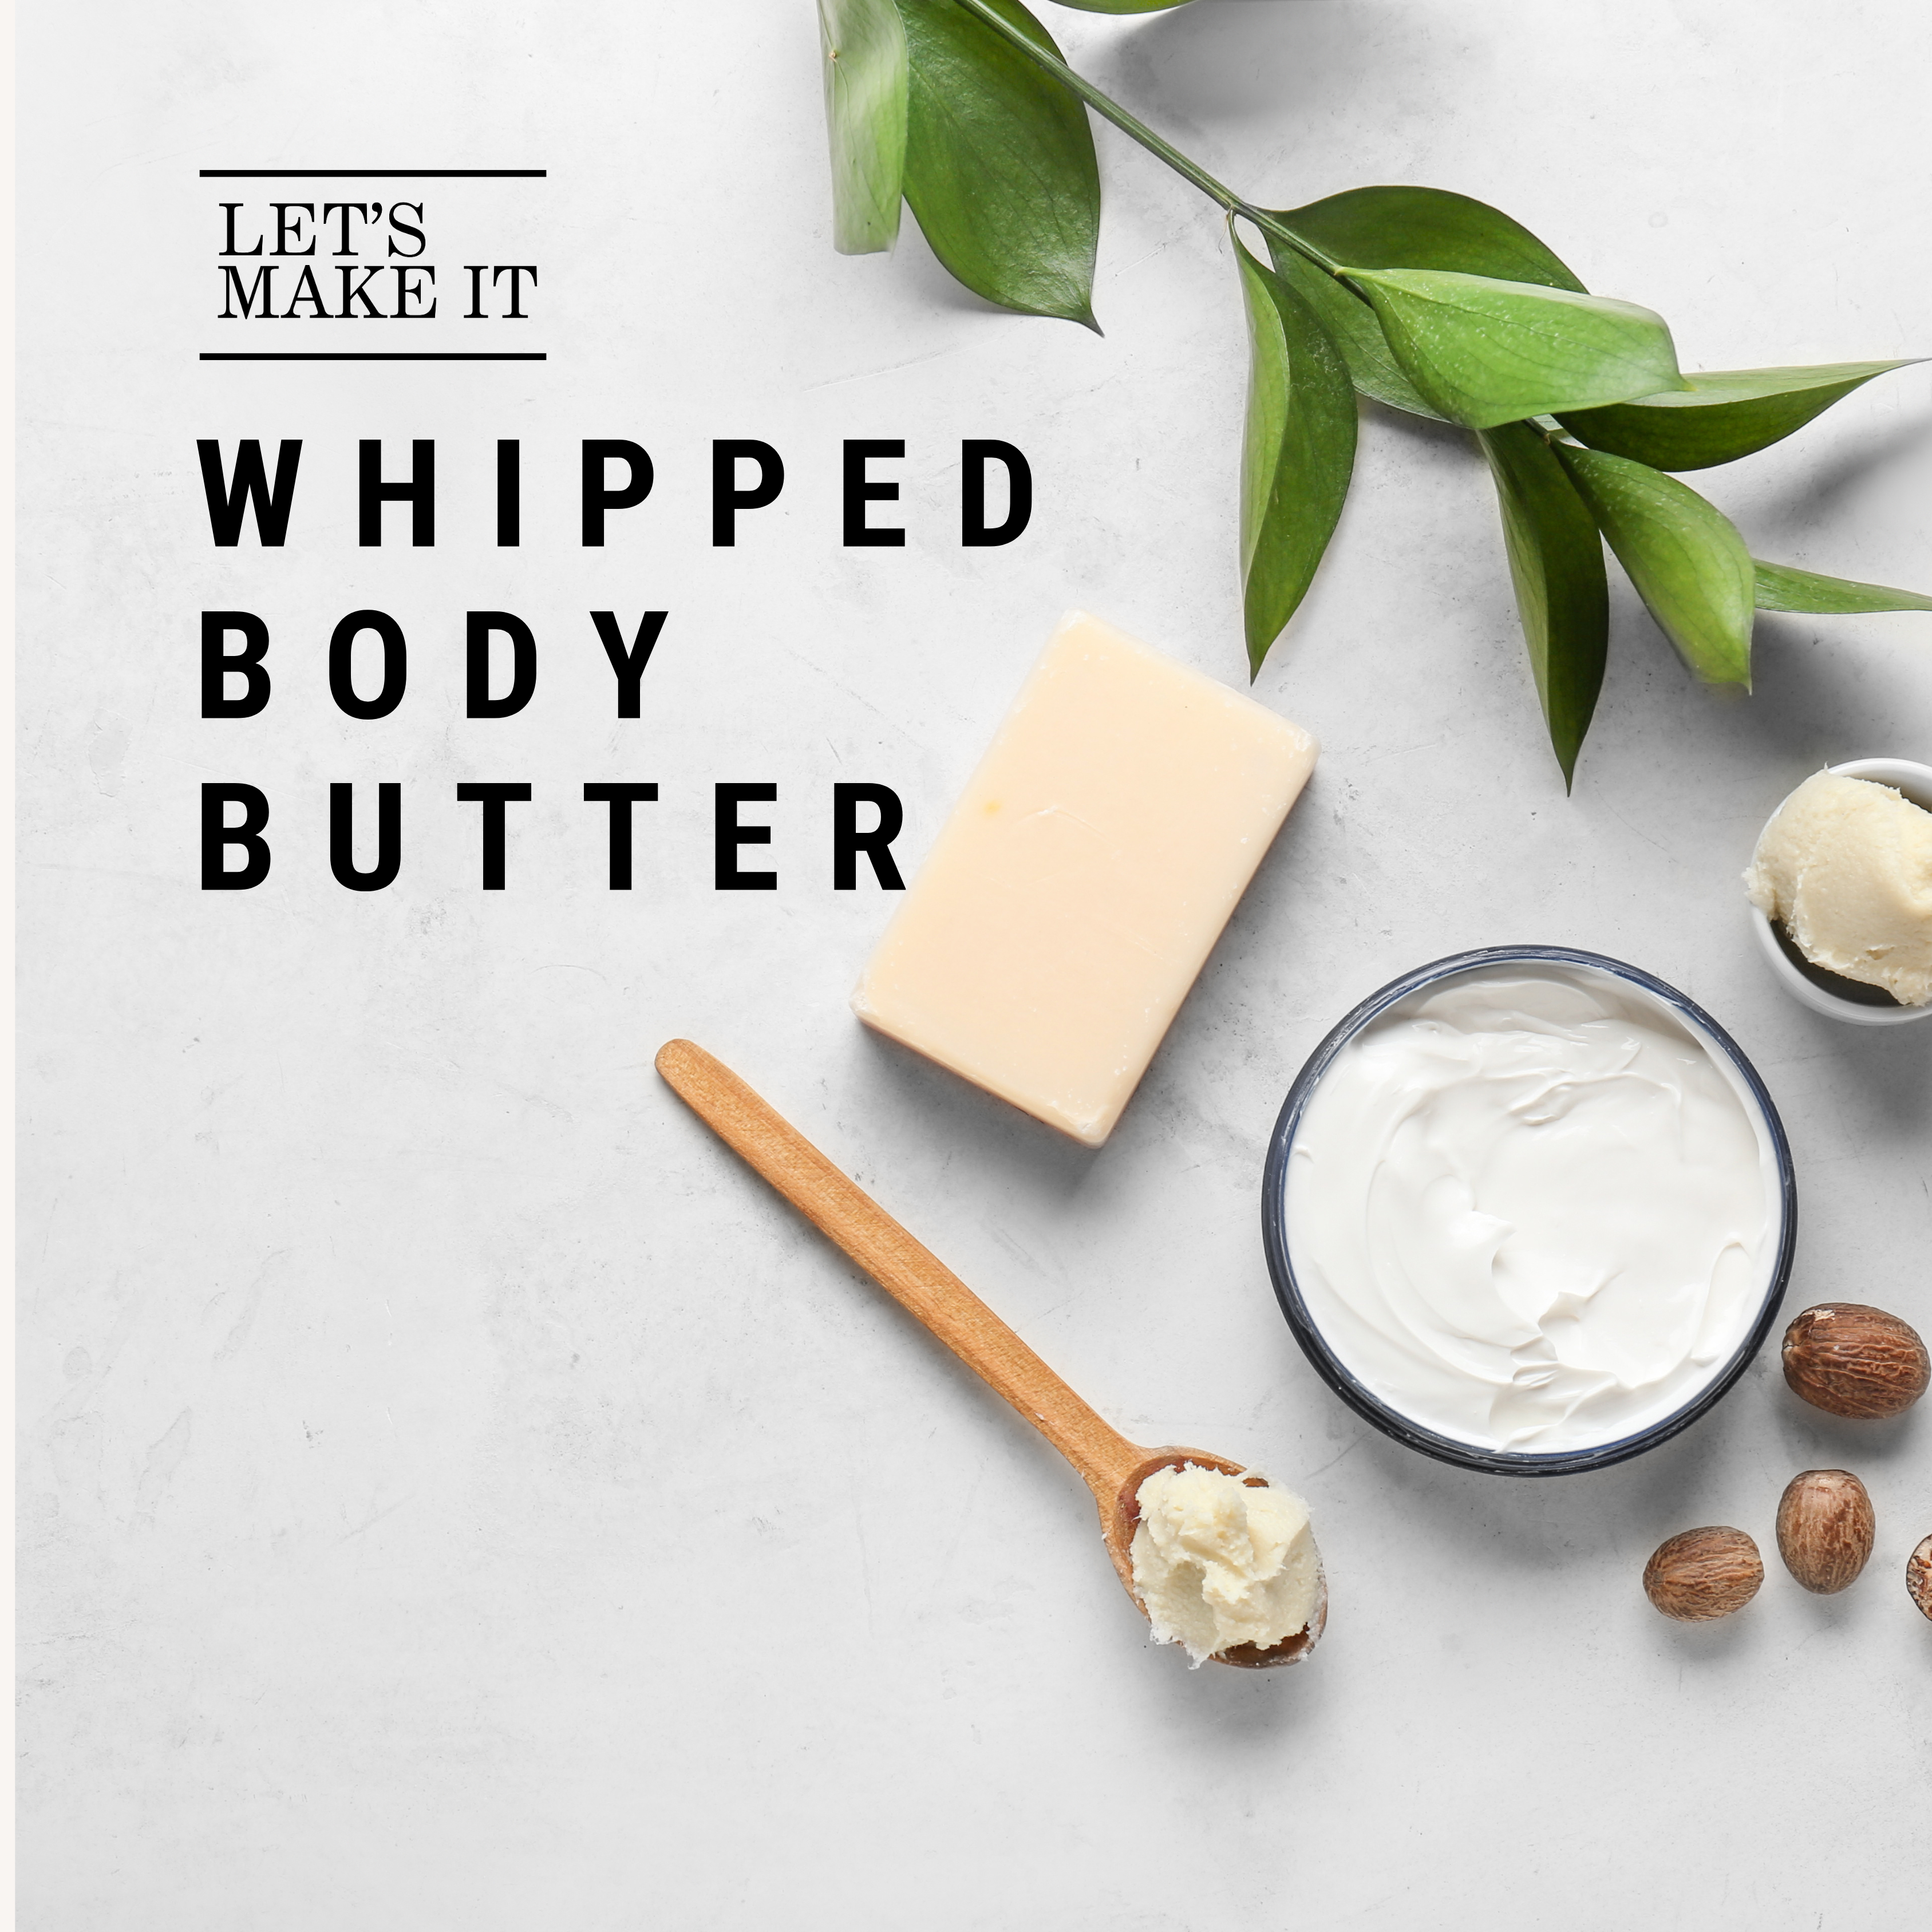 Whipped Body Butter – Let's Make It